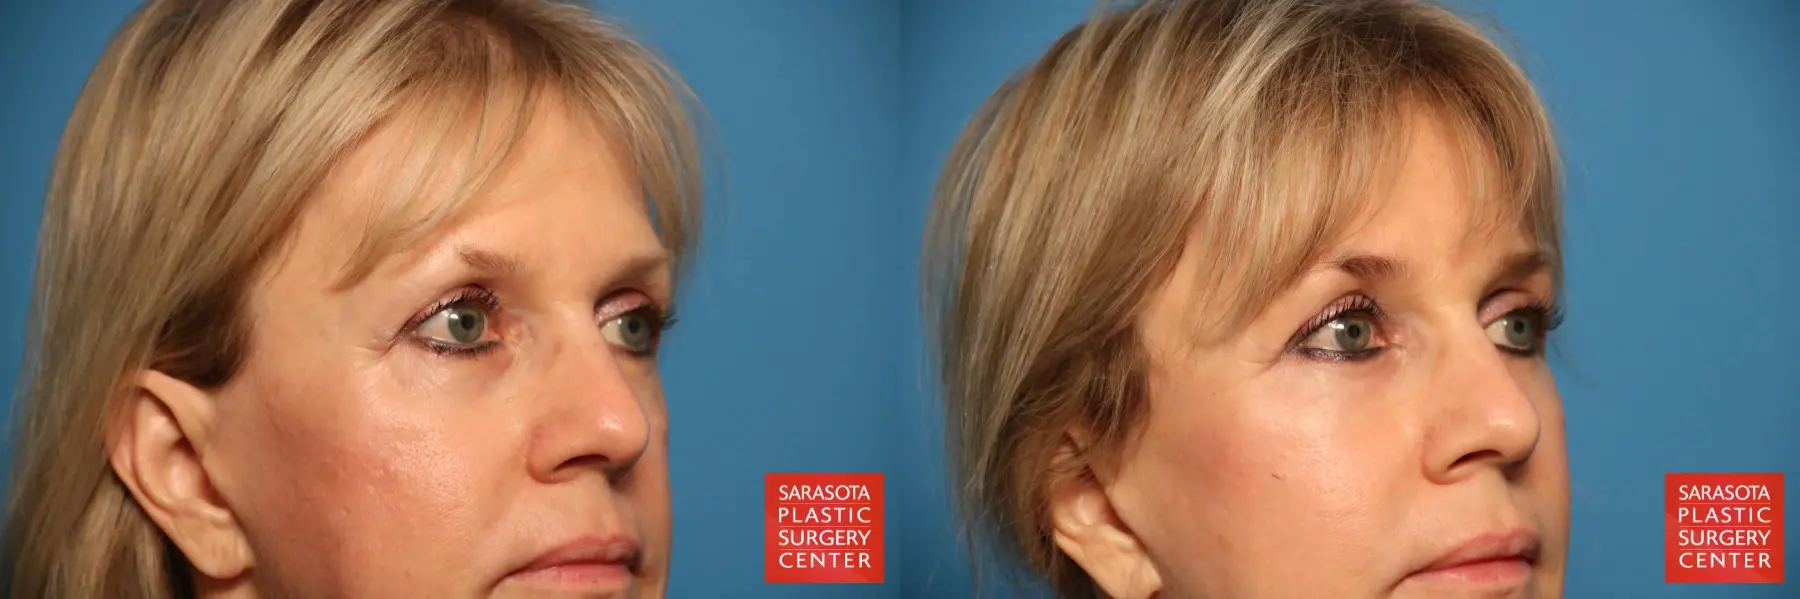 Eyelid Lift: Patient 7 - Before and After 6